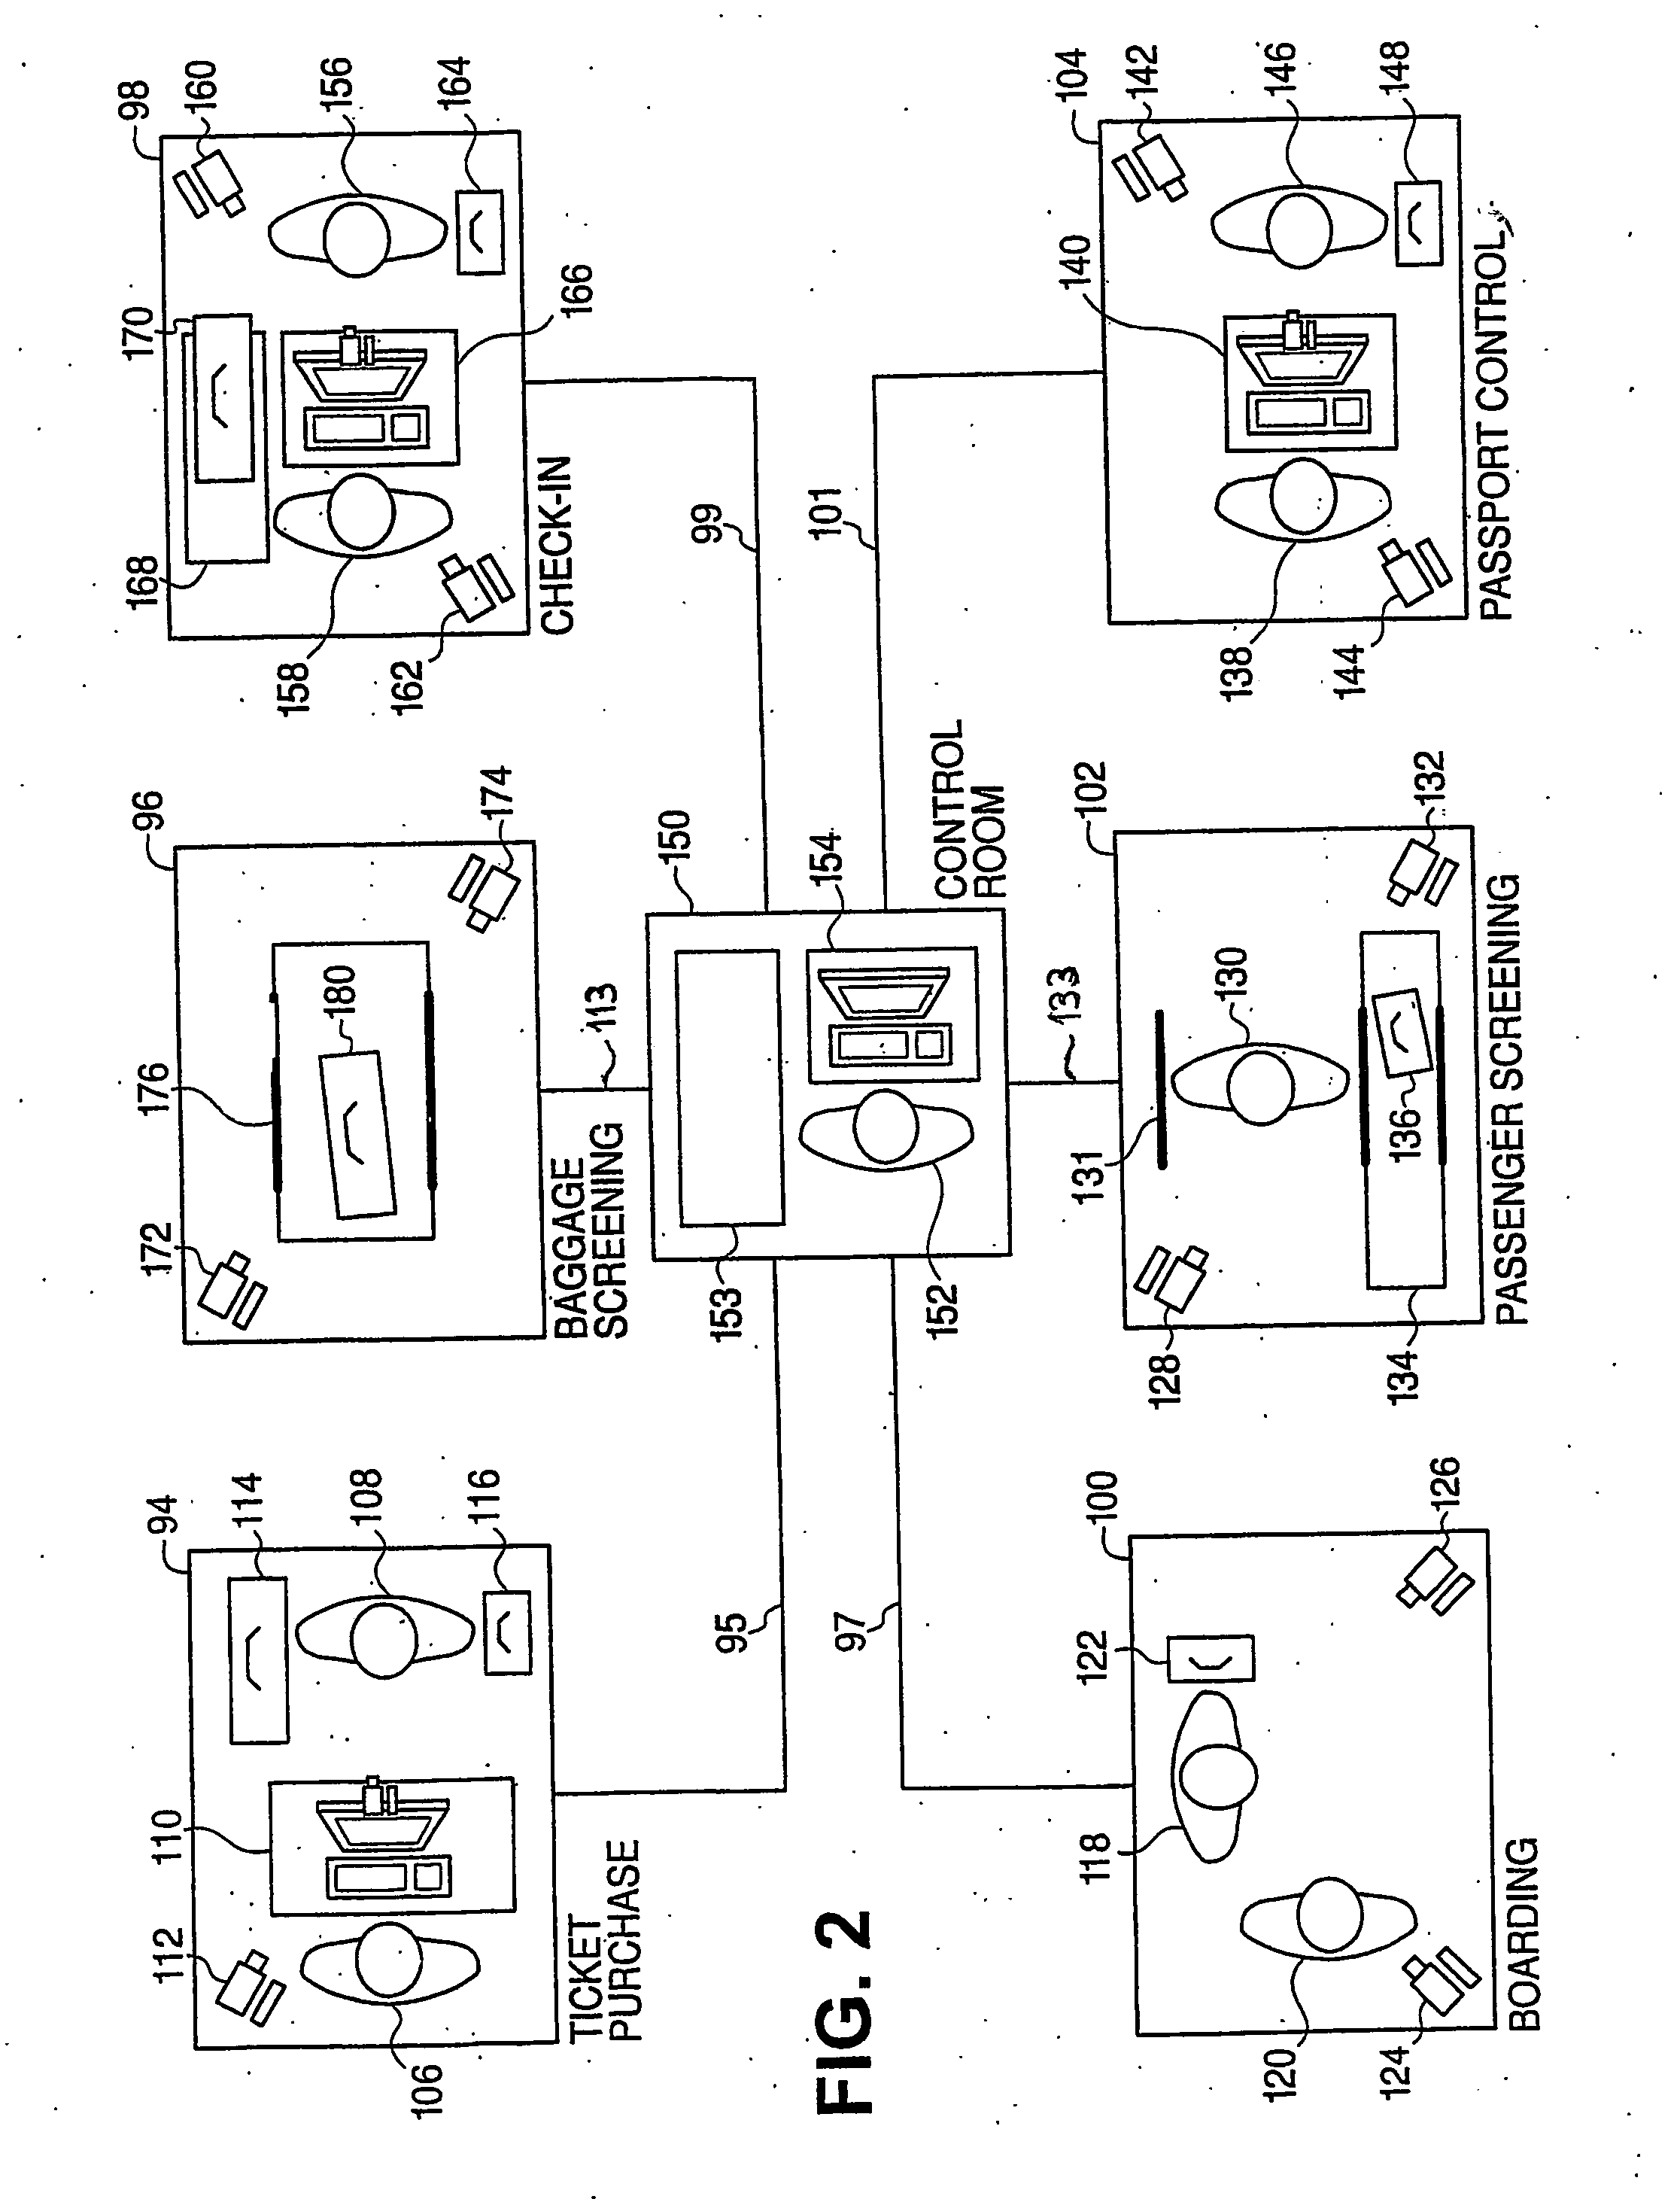 System and method for traveler interactions management